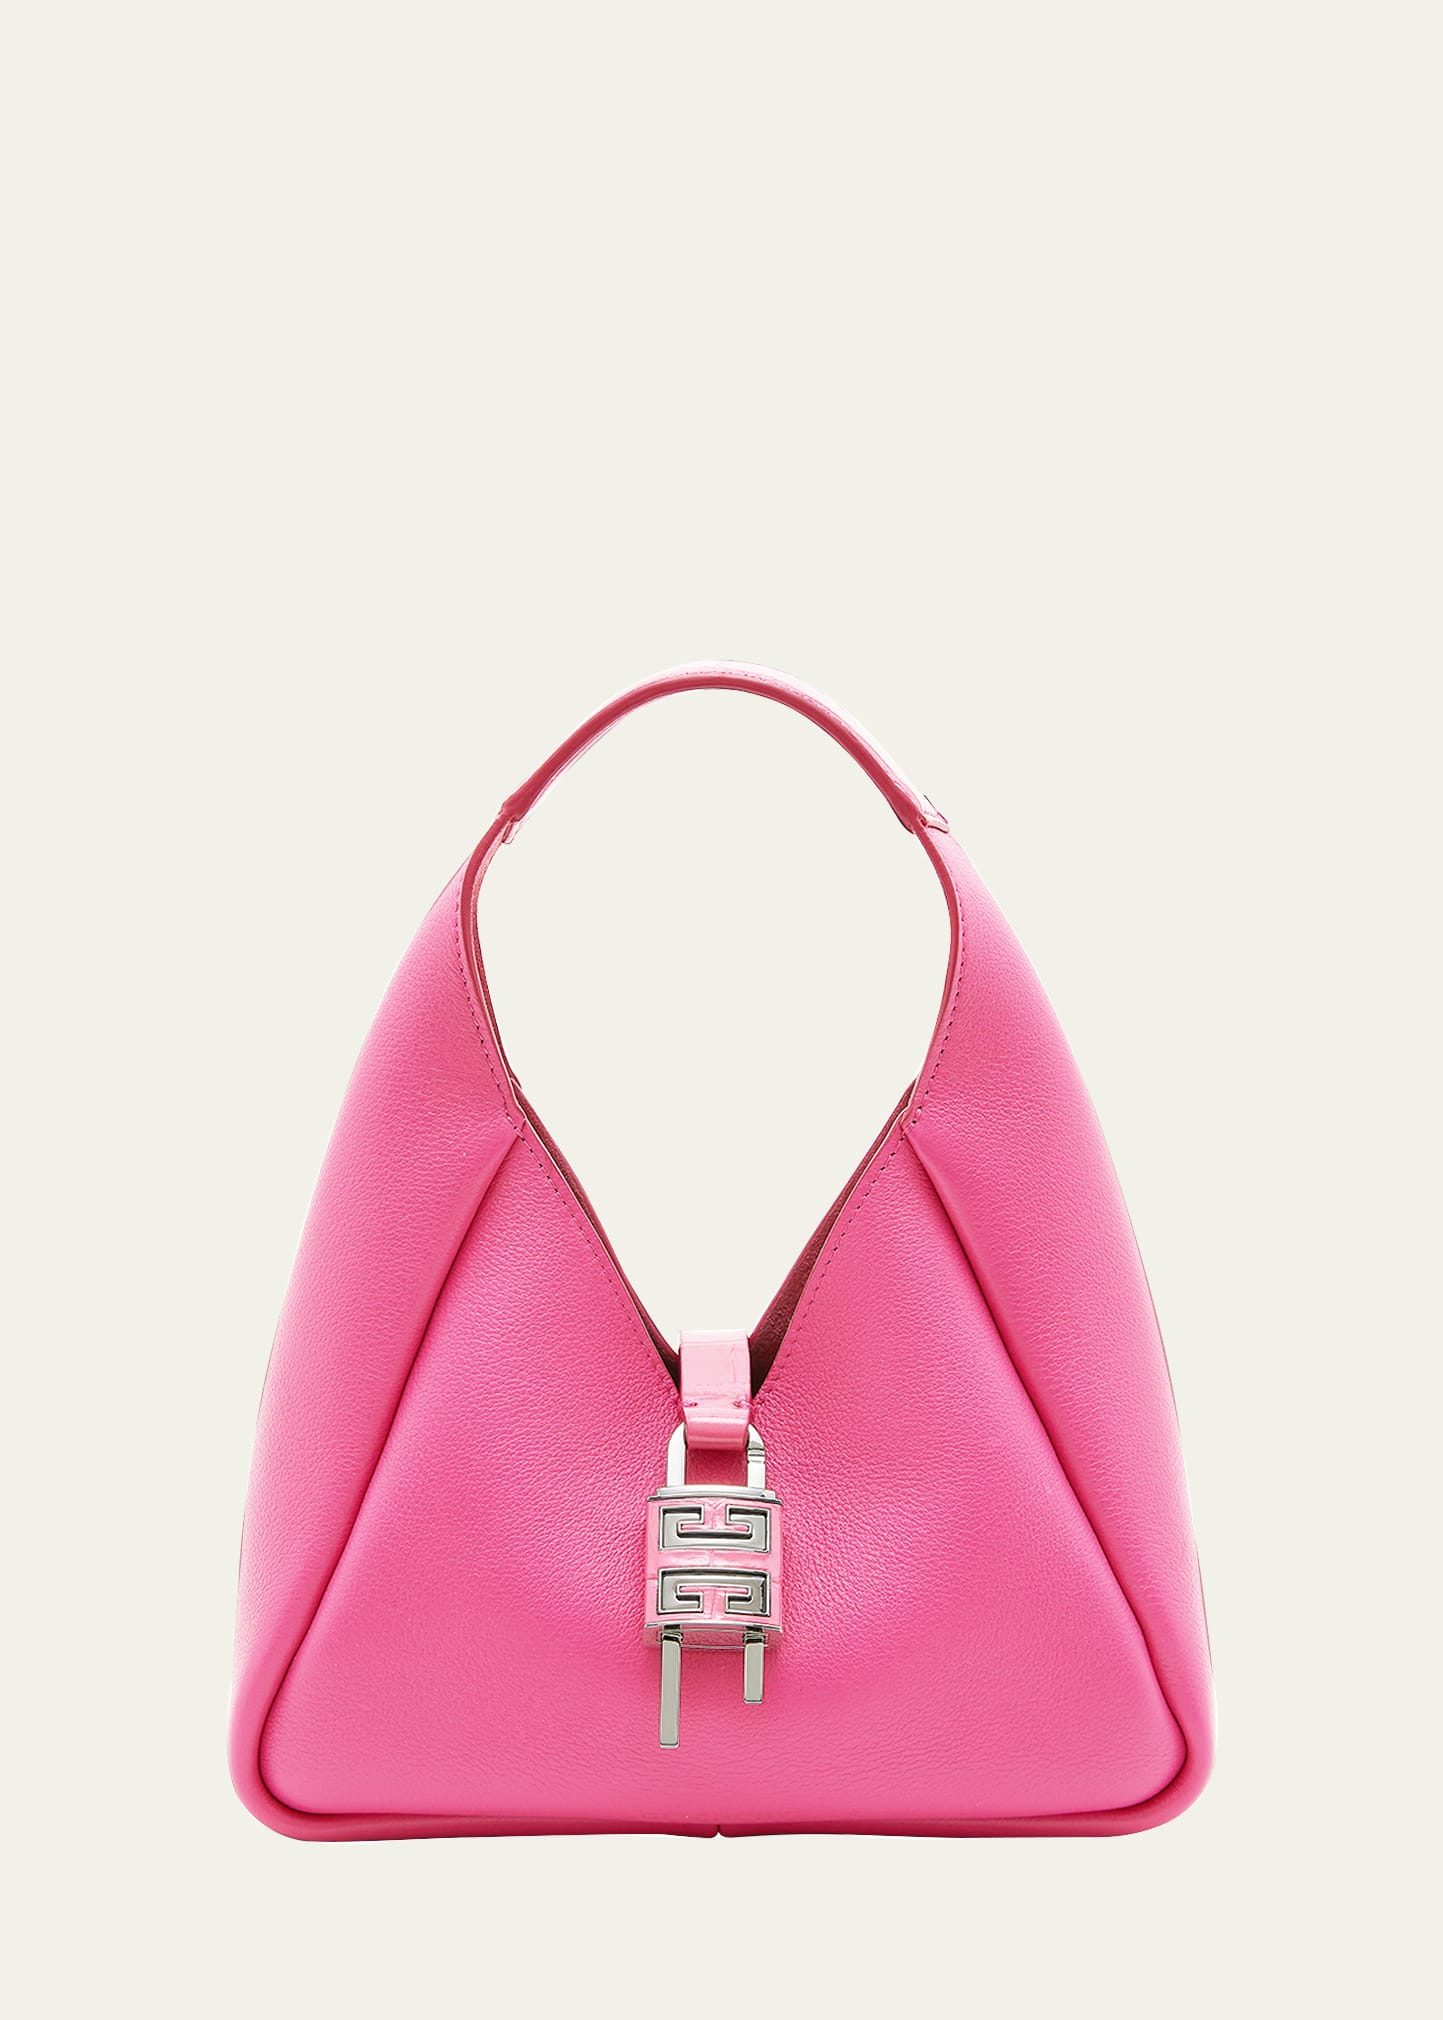 Givenchy Mini Padlock Hobo Bag In Calf Leather In 652 Neon Pink